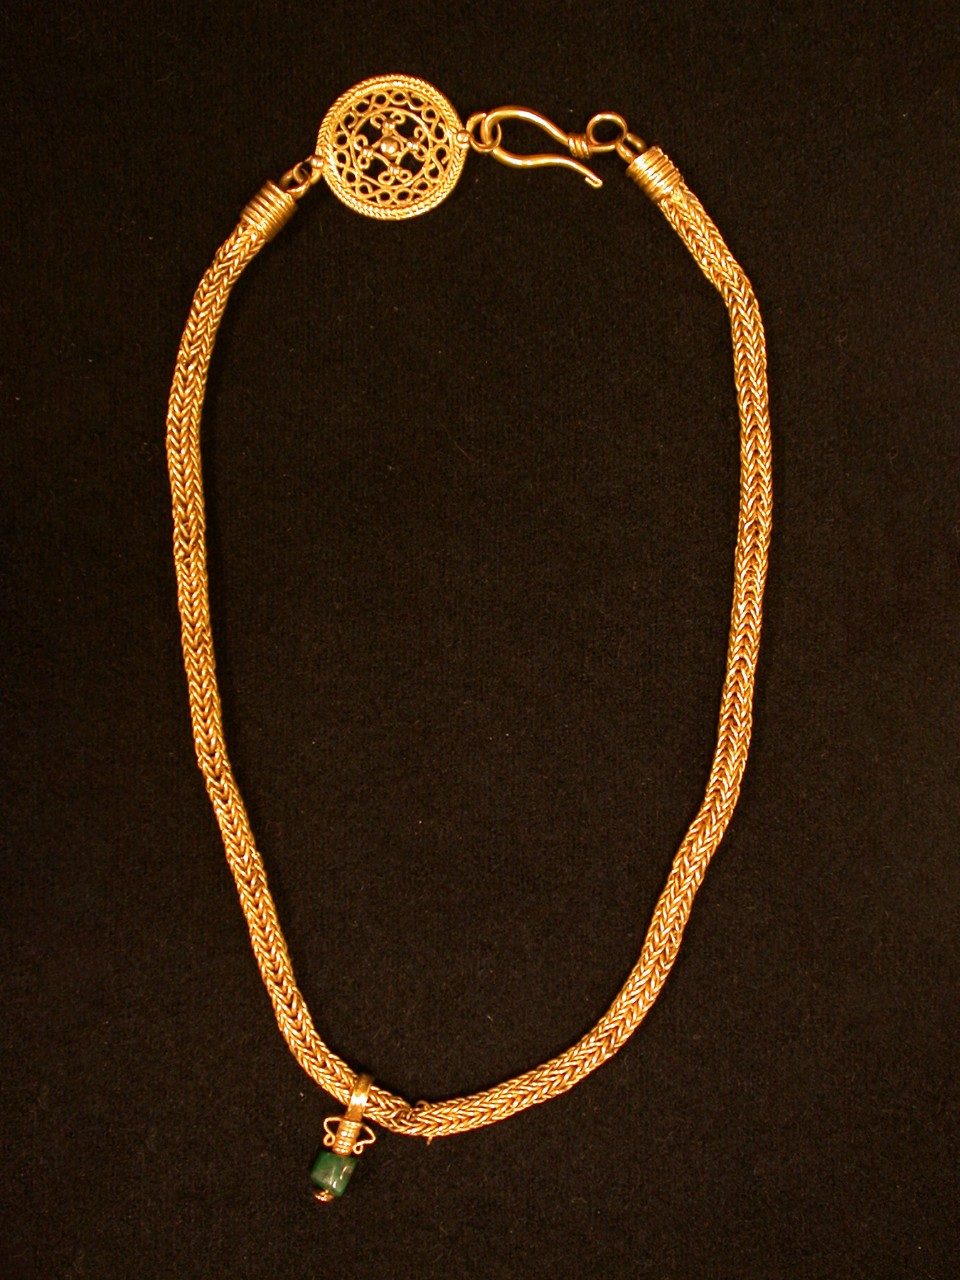 A thick-chained gold necklace with a dangling emerald pendant and ornamental clasp.